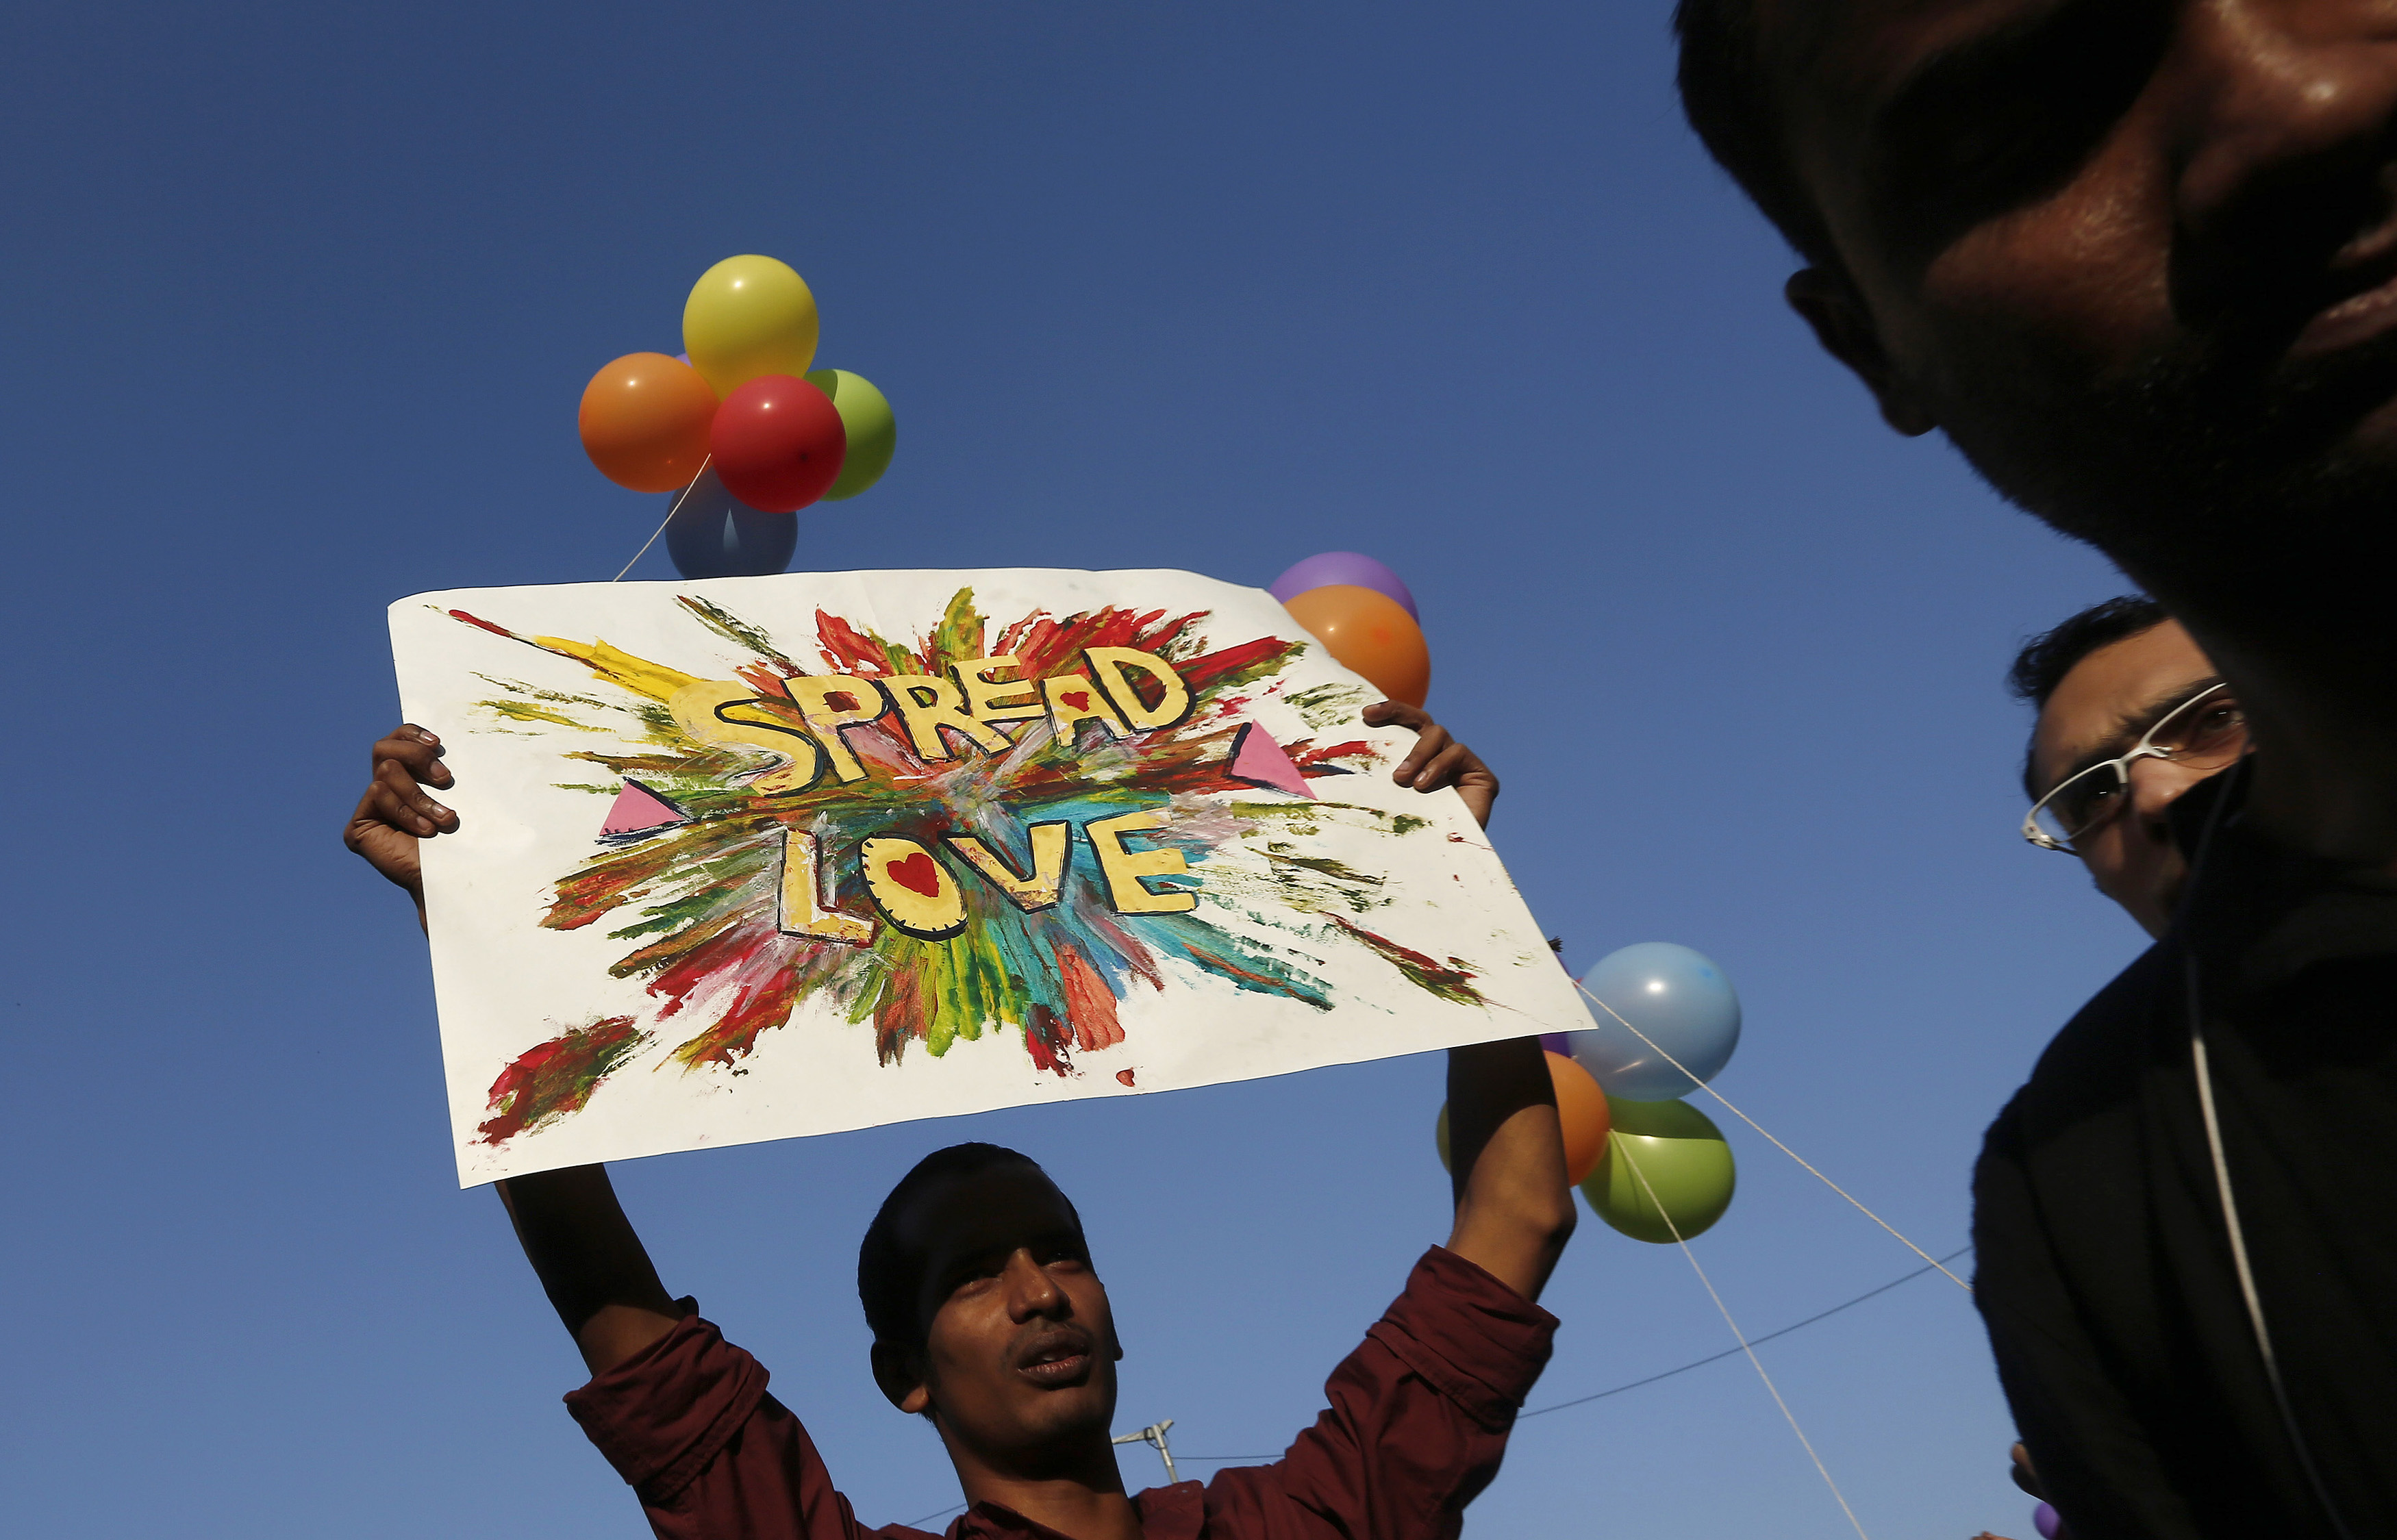 A participant holds a placard during Delhi Queer Pride Parade, an event promoting gay, lesbian, bisexual and transgender rights, in New Delhi on Nov. 30, 2014 (Adnan Abidi—Reuters)